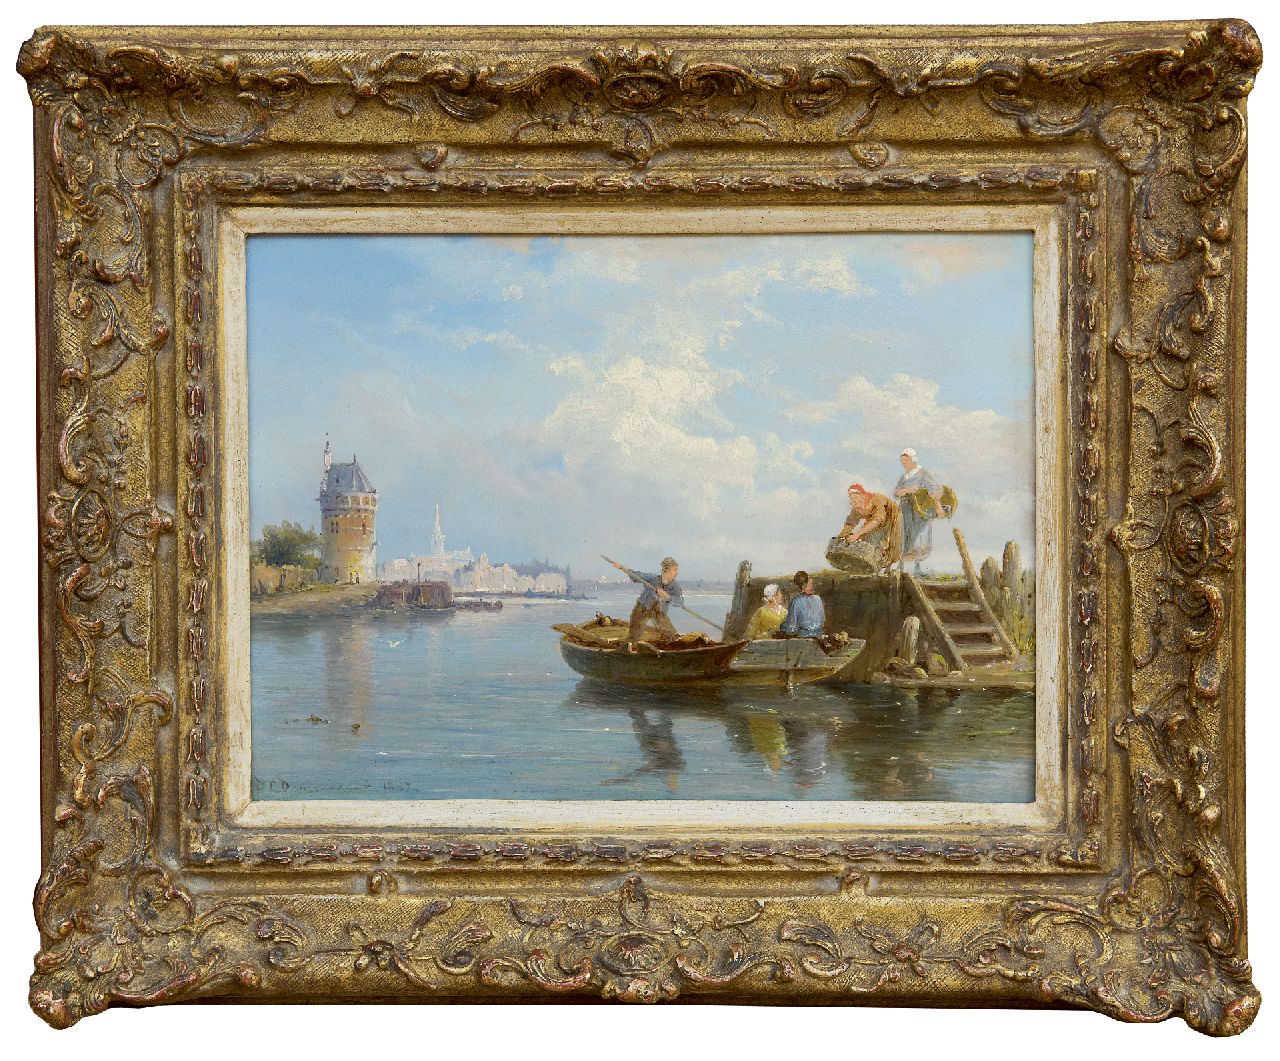 Dommershuijzen P.C.  | Pieter Cornelis Dommershuijzen | Paintings offered for sale | Unloading the catch, Hoorn, oil on panel 18.8 x 25.4 cm, signed l.l. and dated 1887